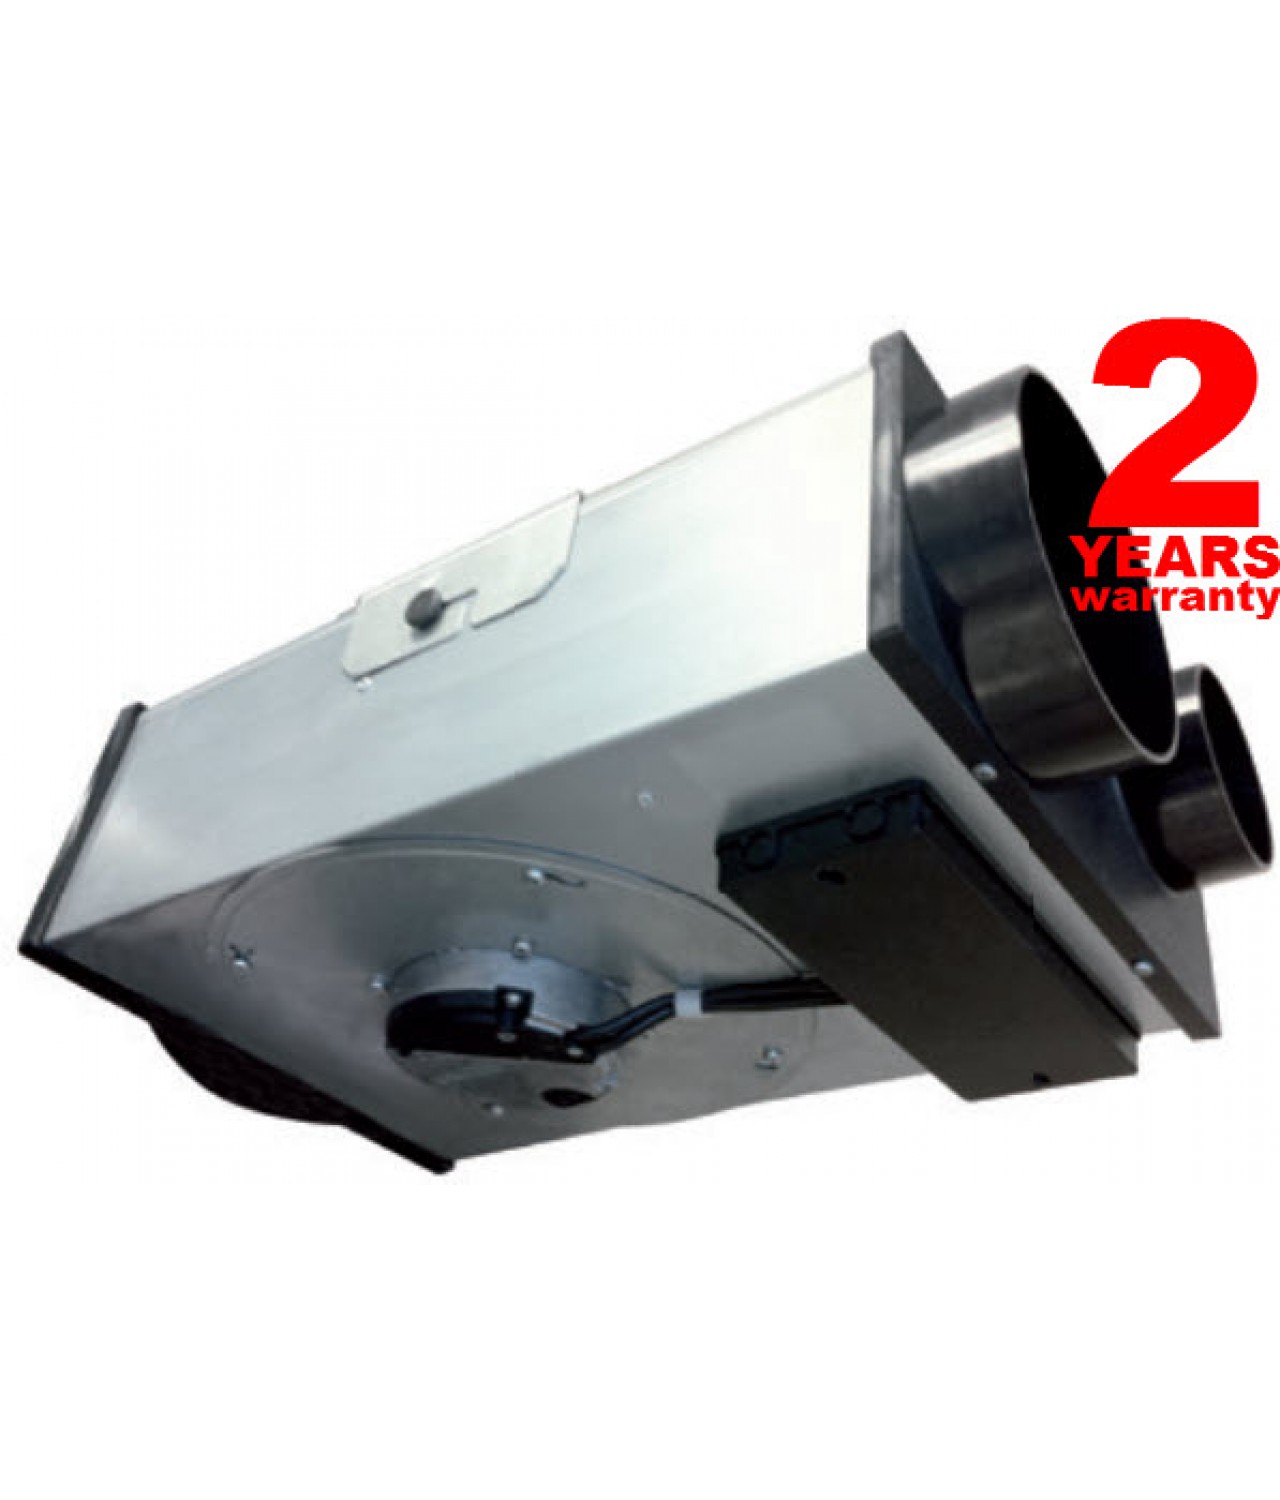 MICROBOX AQS - ultra thin and quiet centrifugal ducted fans with control panel, air quality, humidity and temperature sensor ≤246-360 m³/h